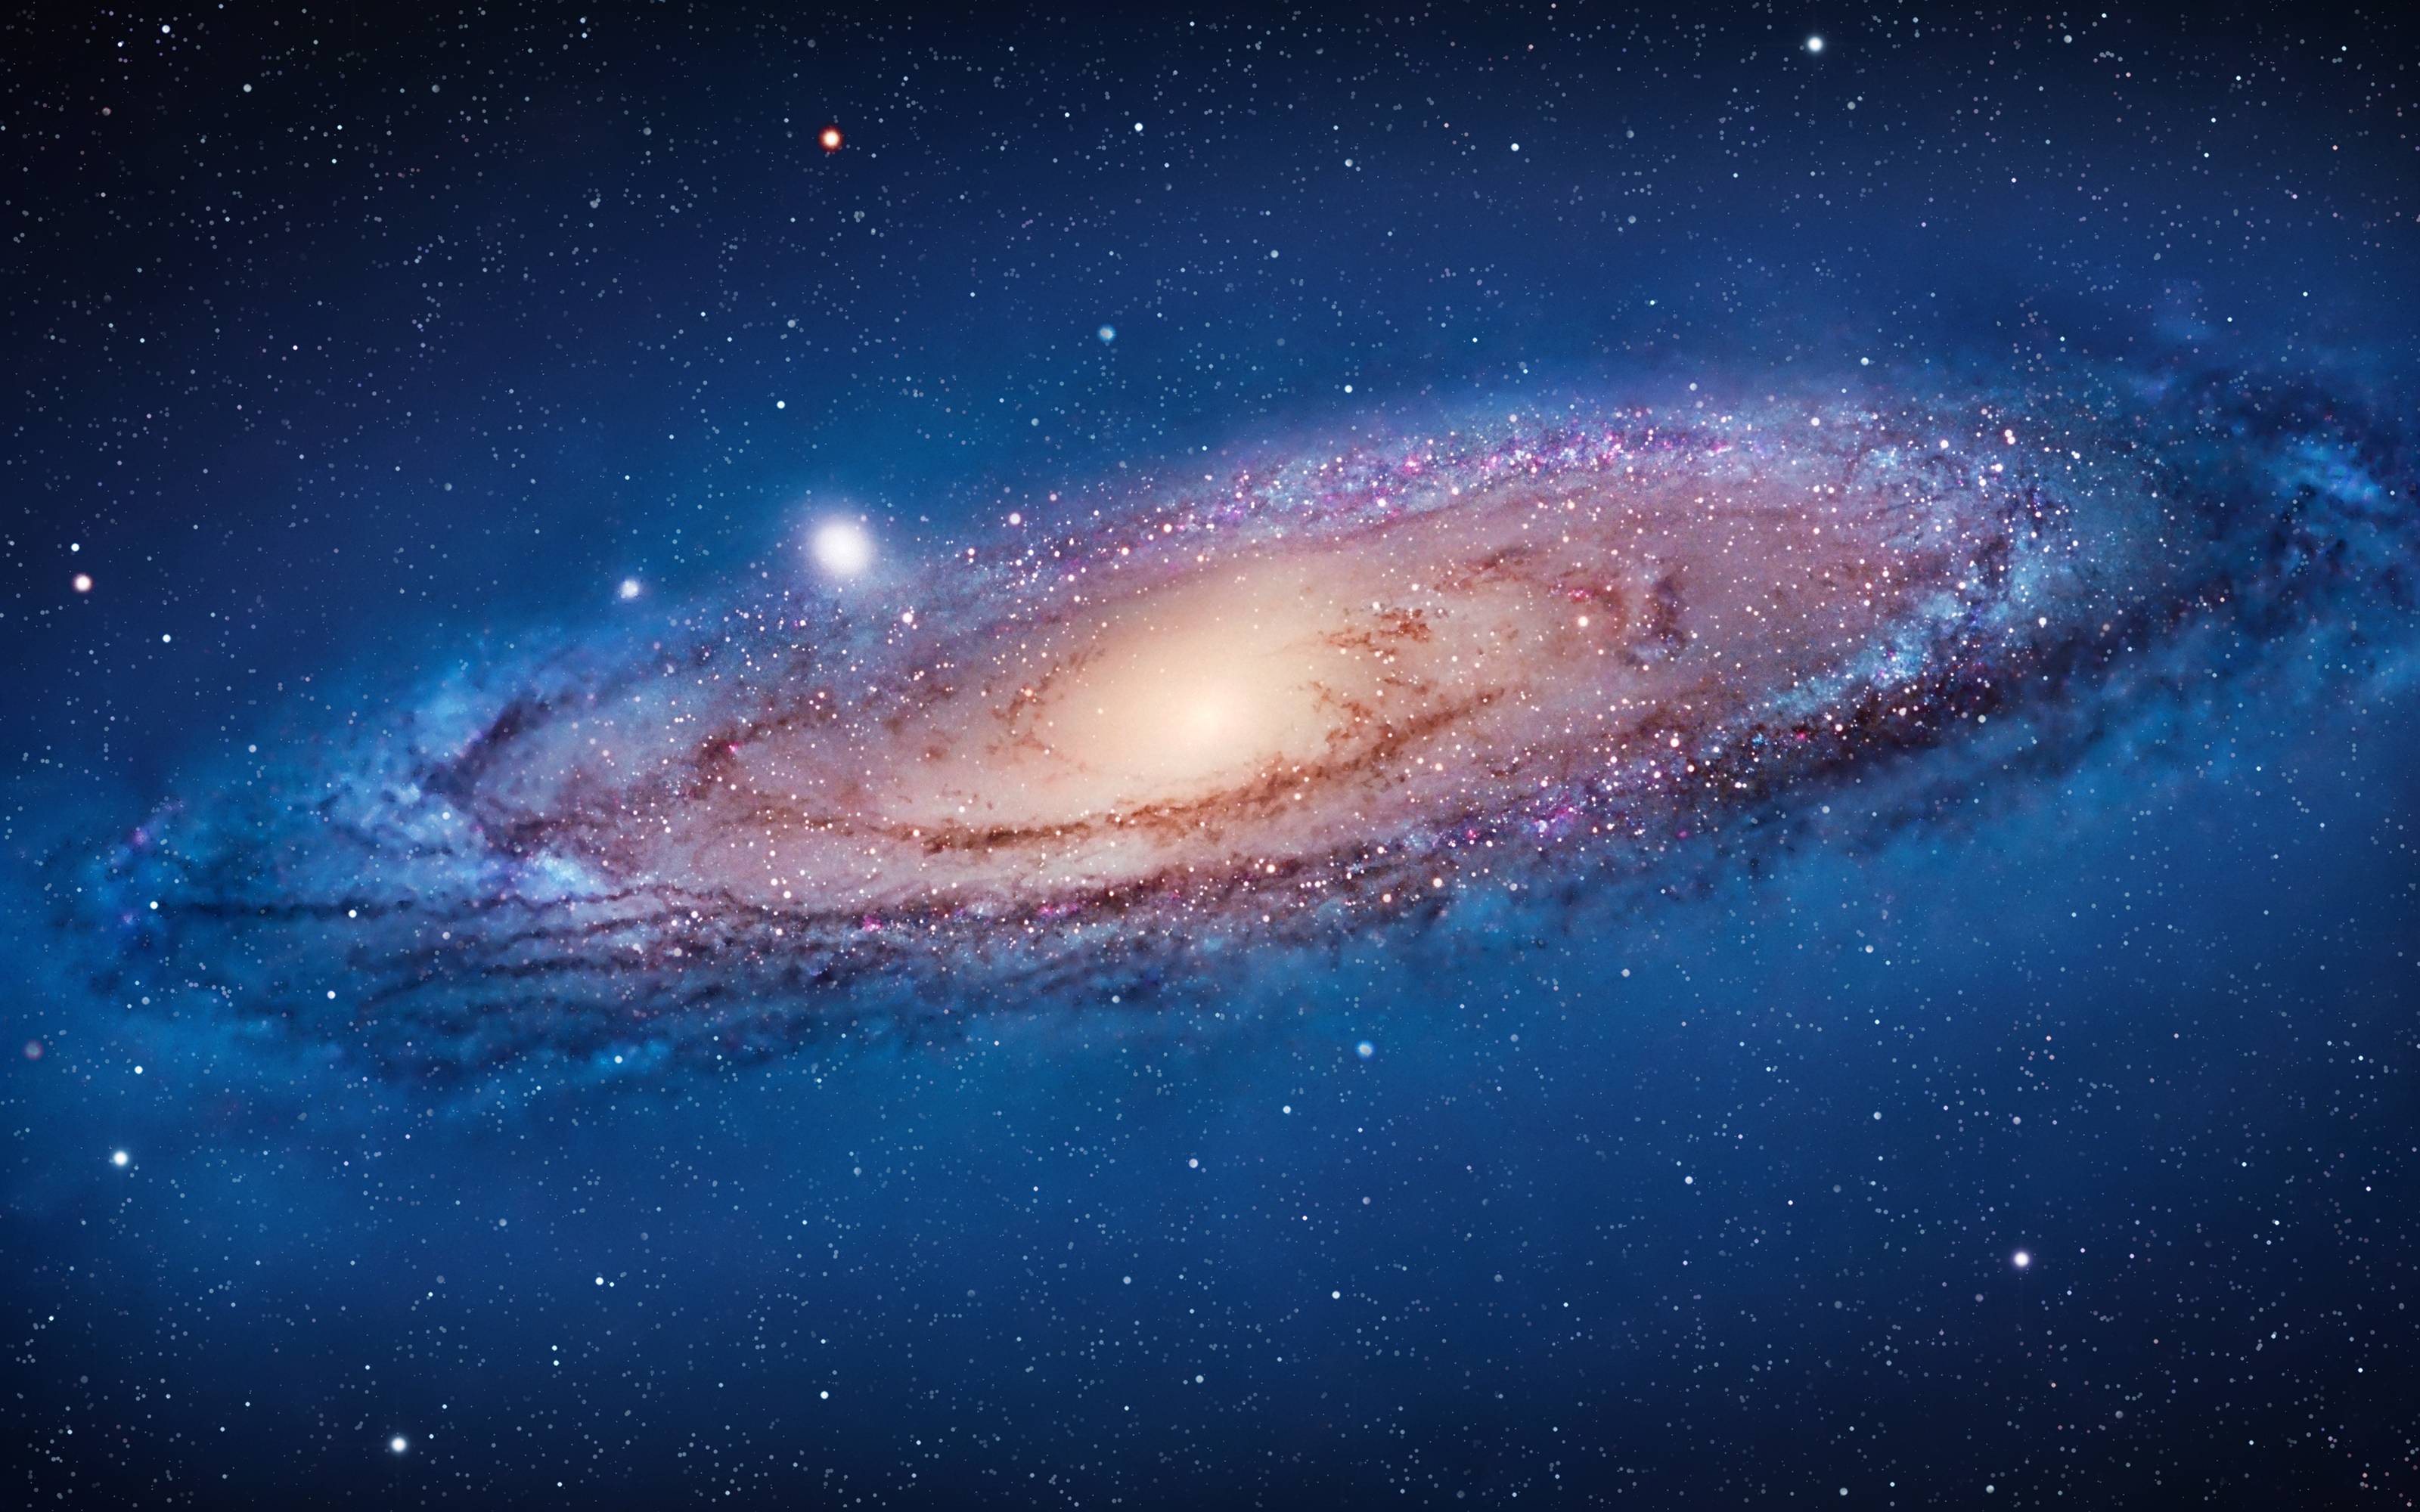 New Mac OS X Lion Galaxy of Andromeda Space Wallpaper from WWDC